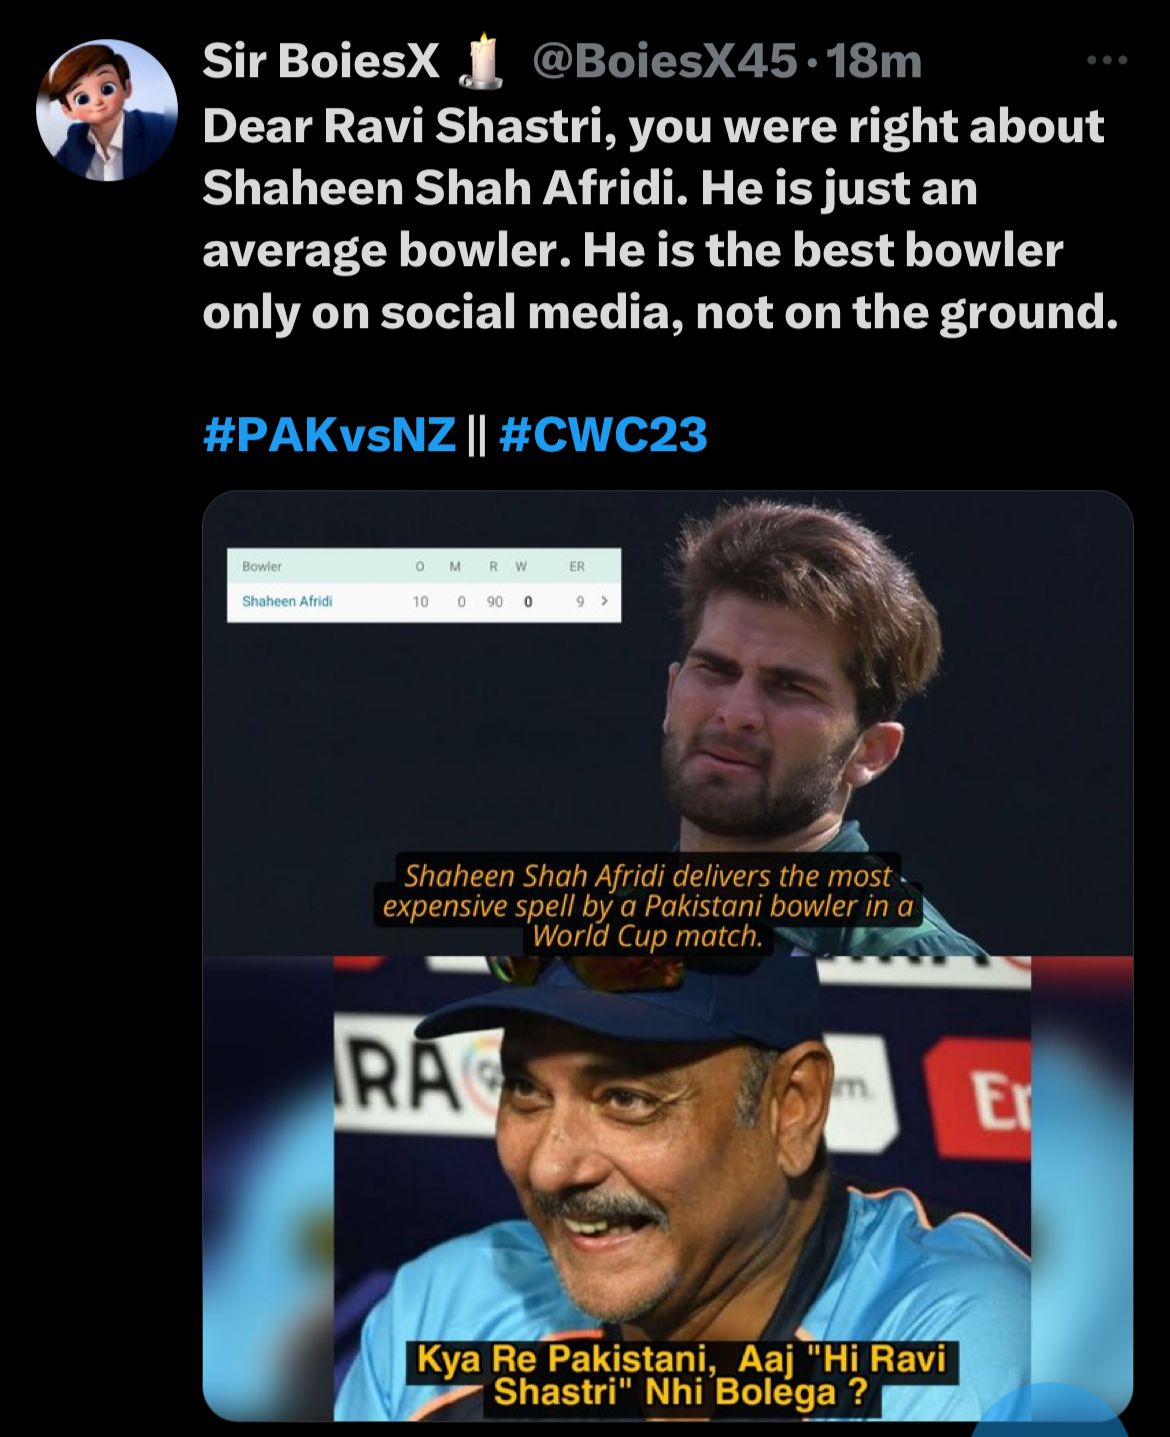 PAK vs NZ: Memes Broke The Internet After Shaheen Afridi Delivered The Most Expensive Spell